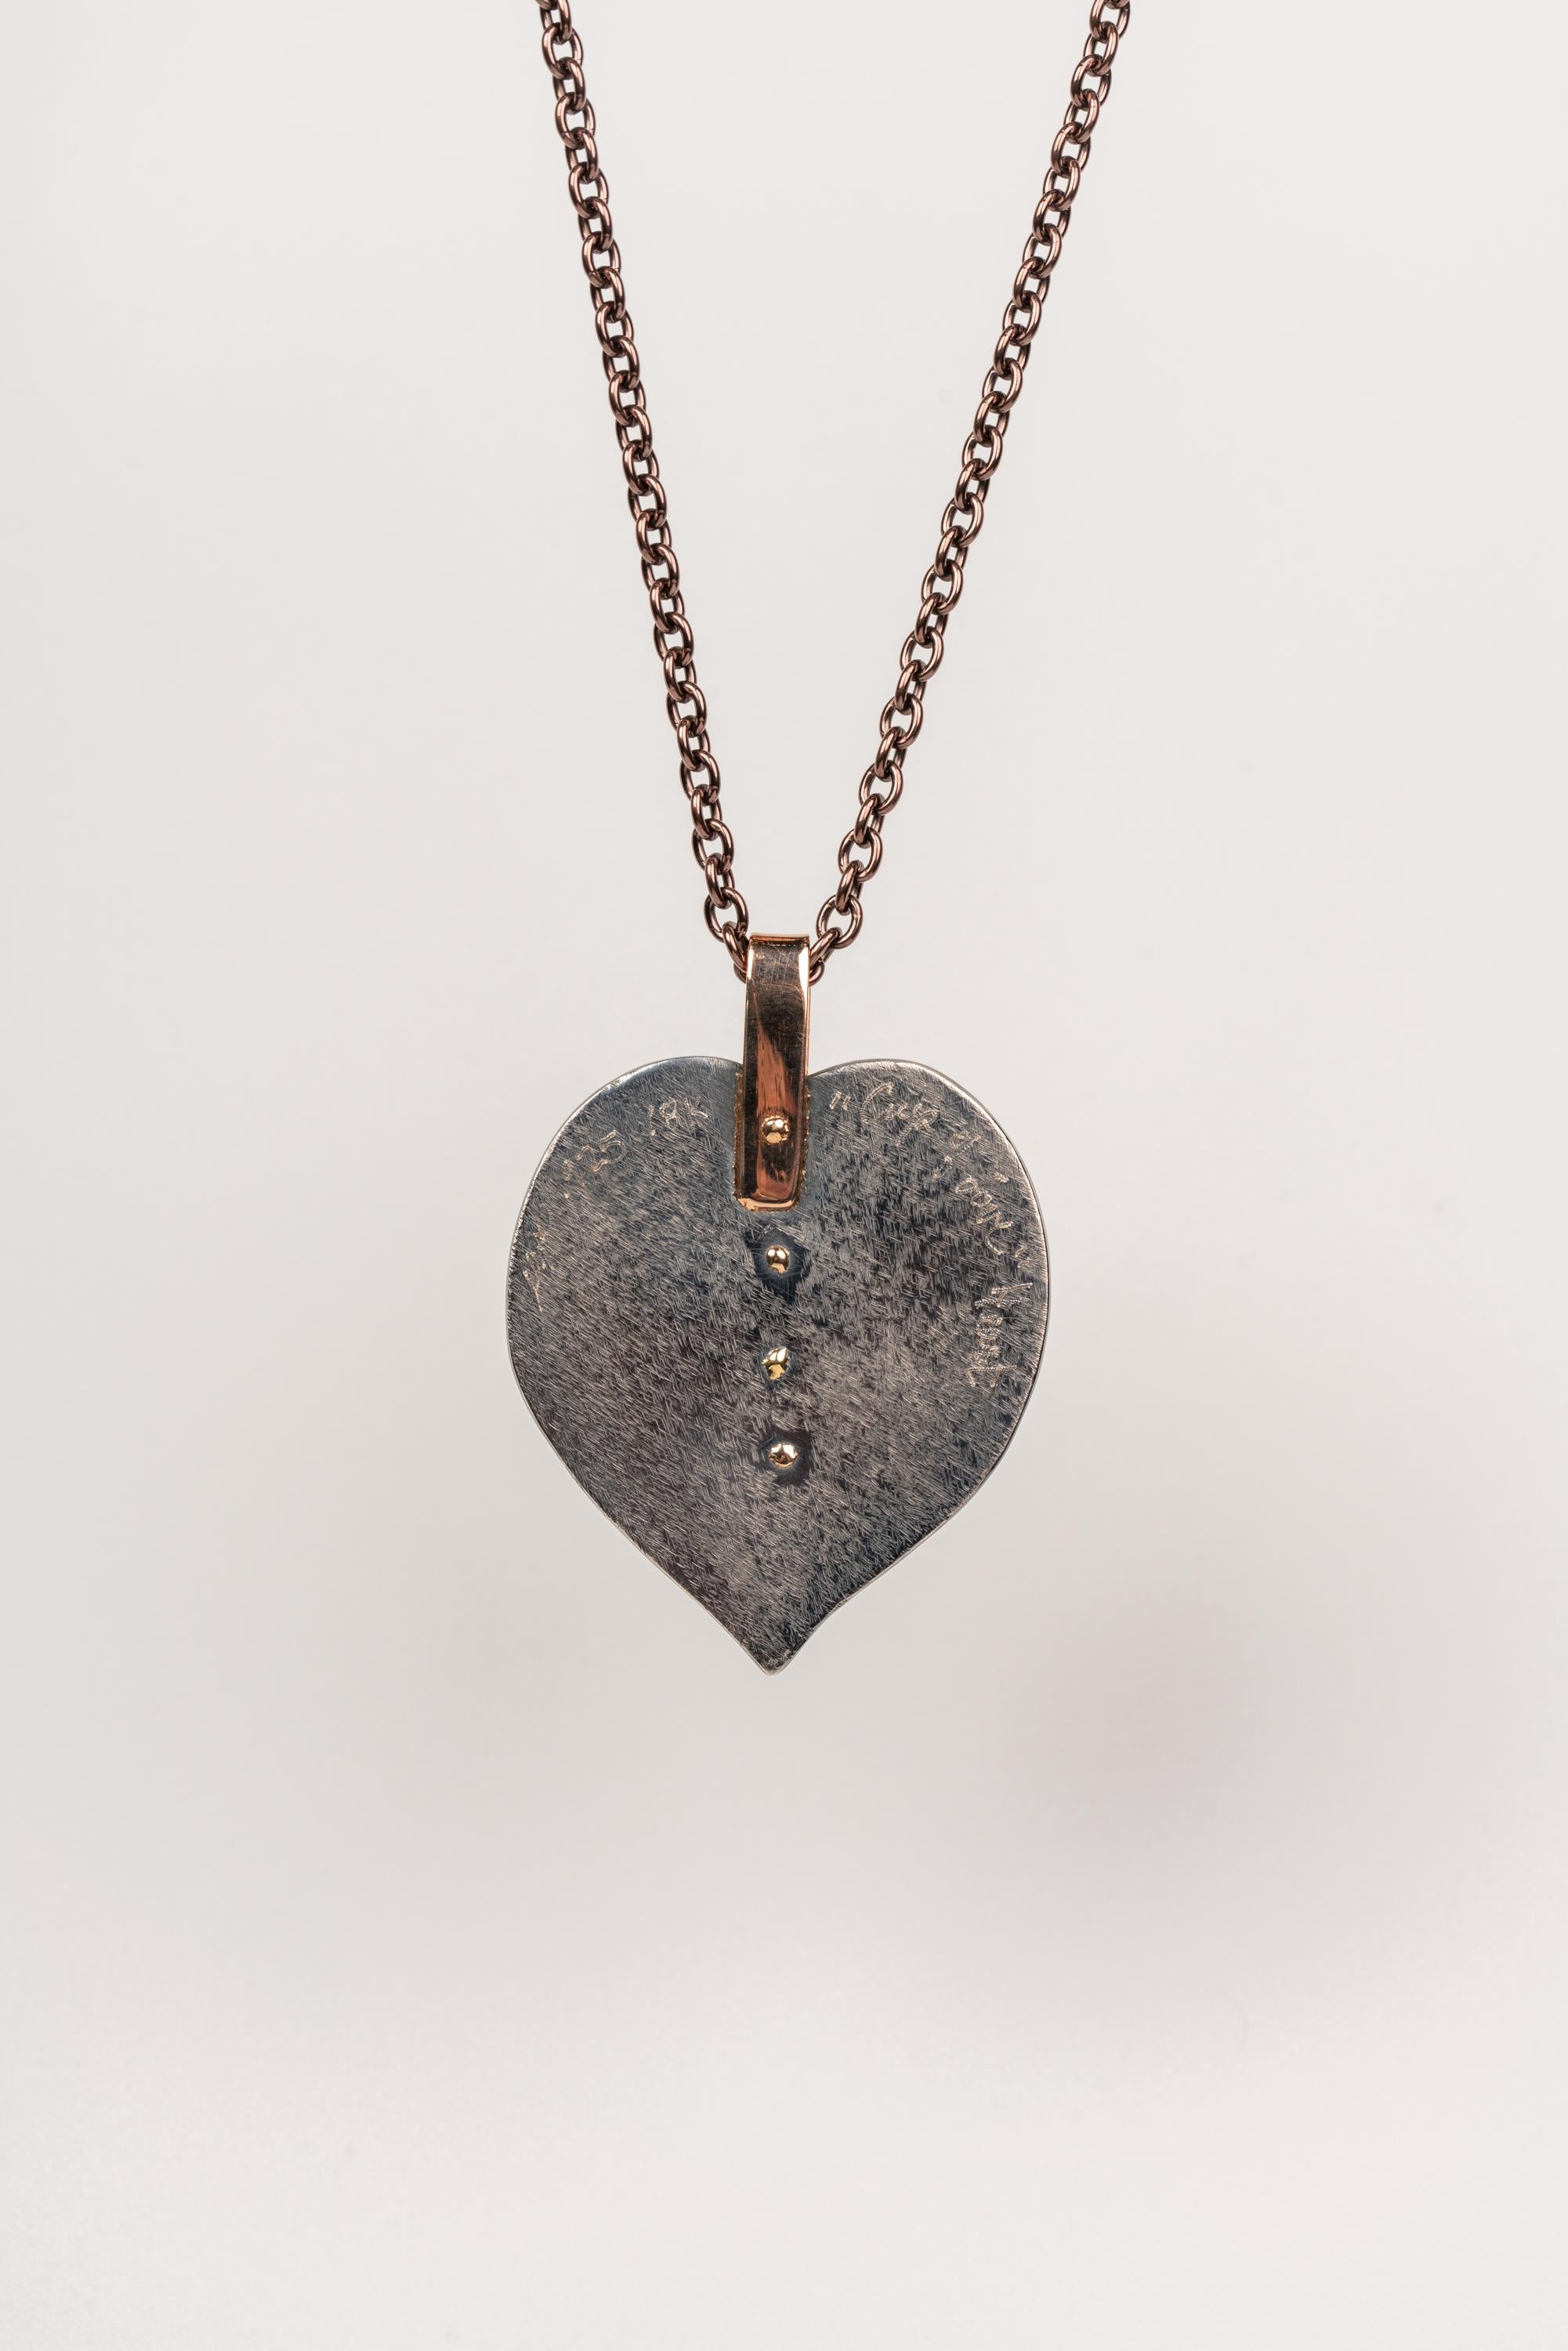 Bead 18 Karat, Sterling Silver, and Rusted Iron Heart Necklace with a South Sea Pearl